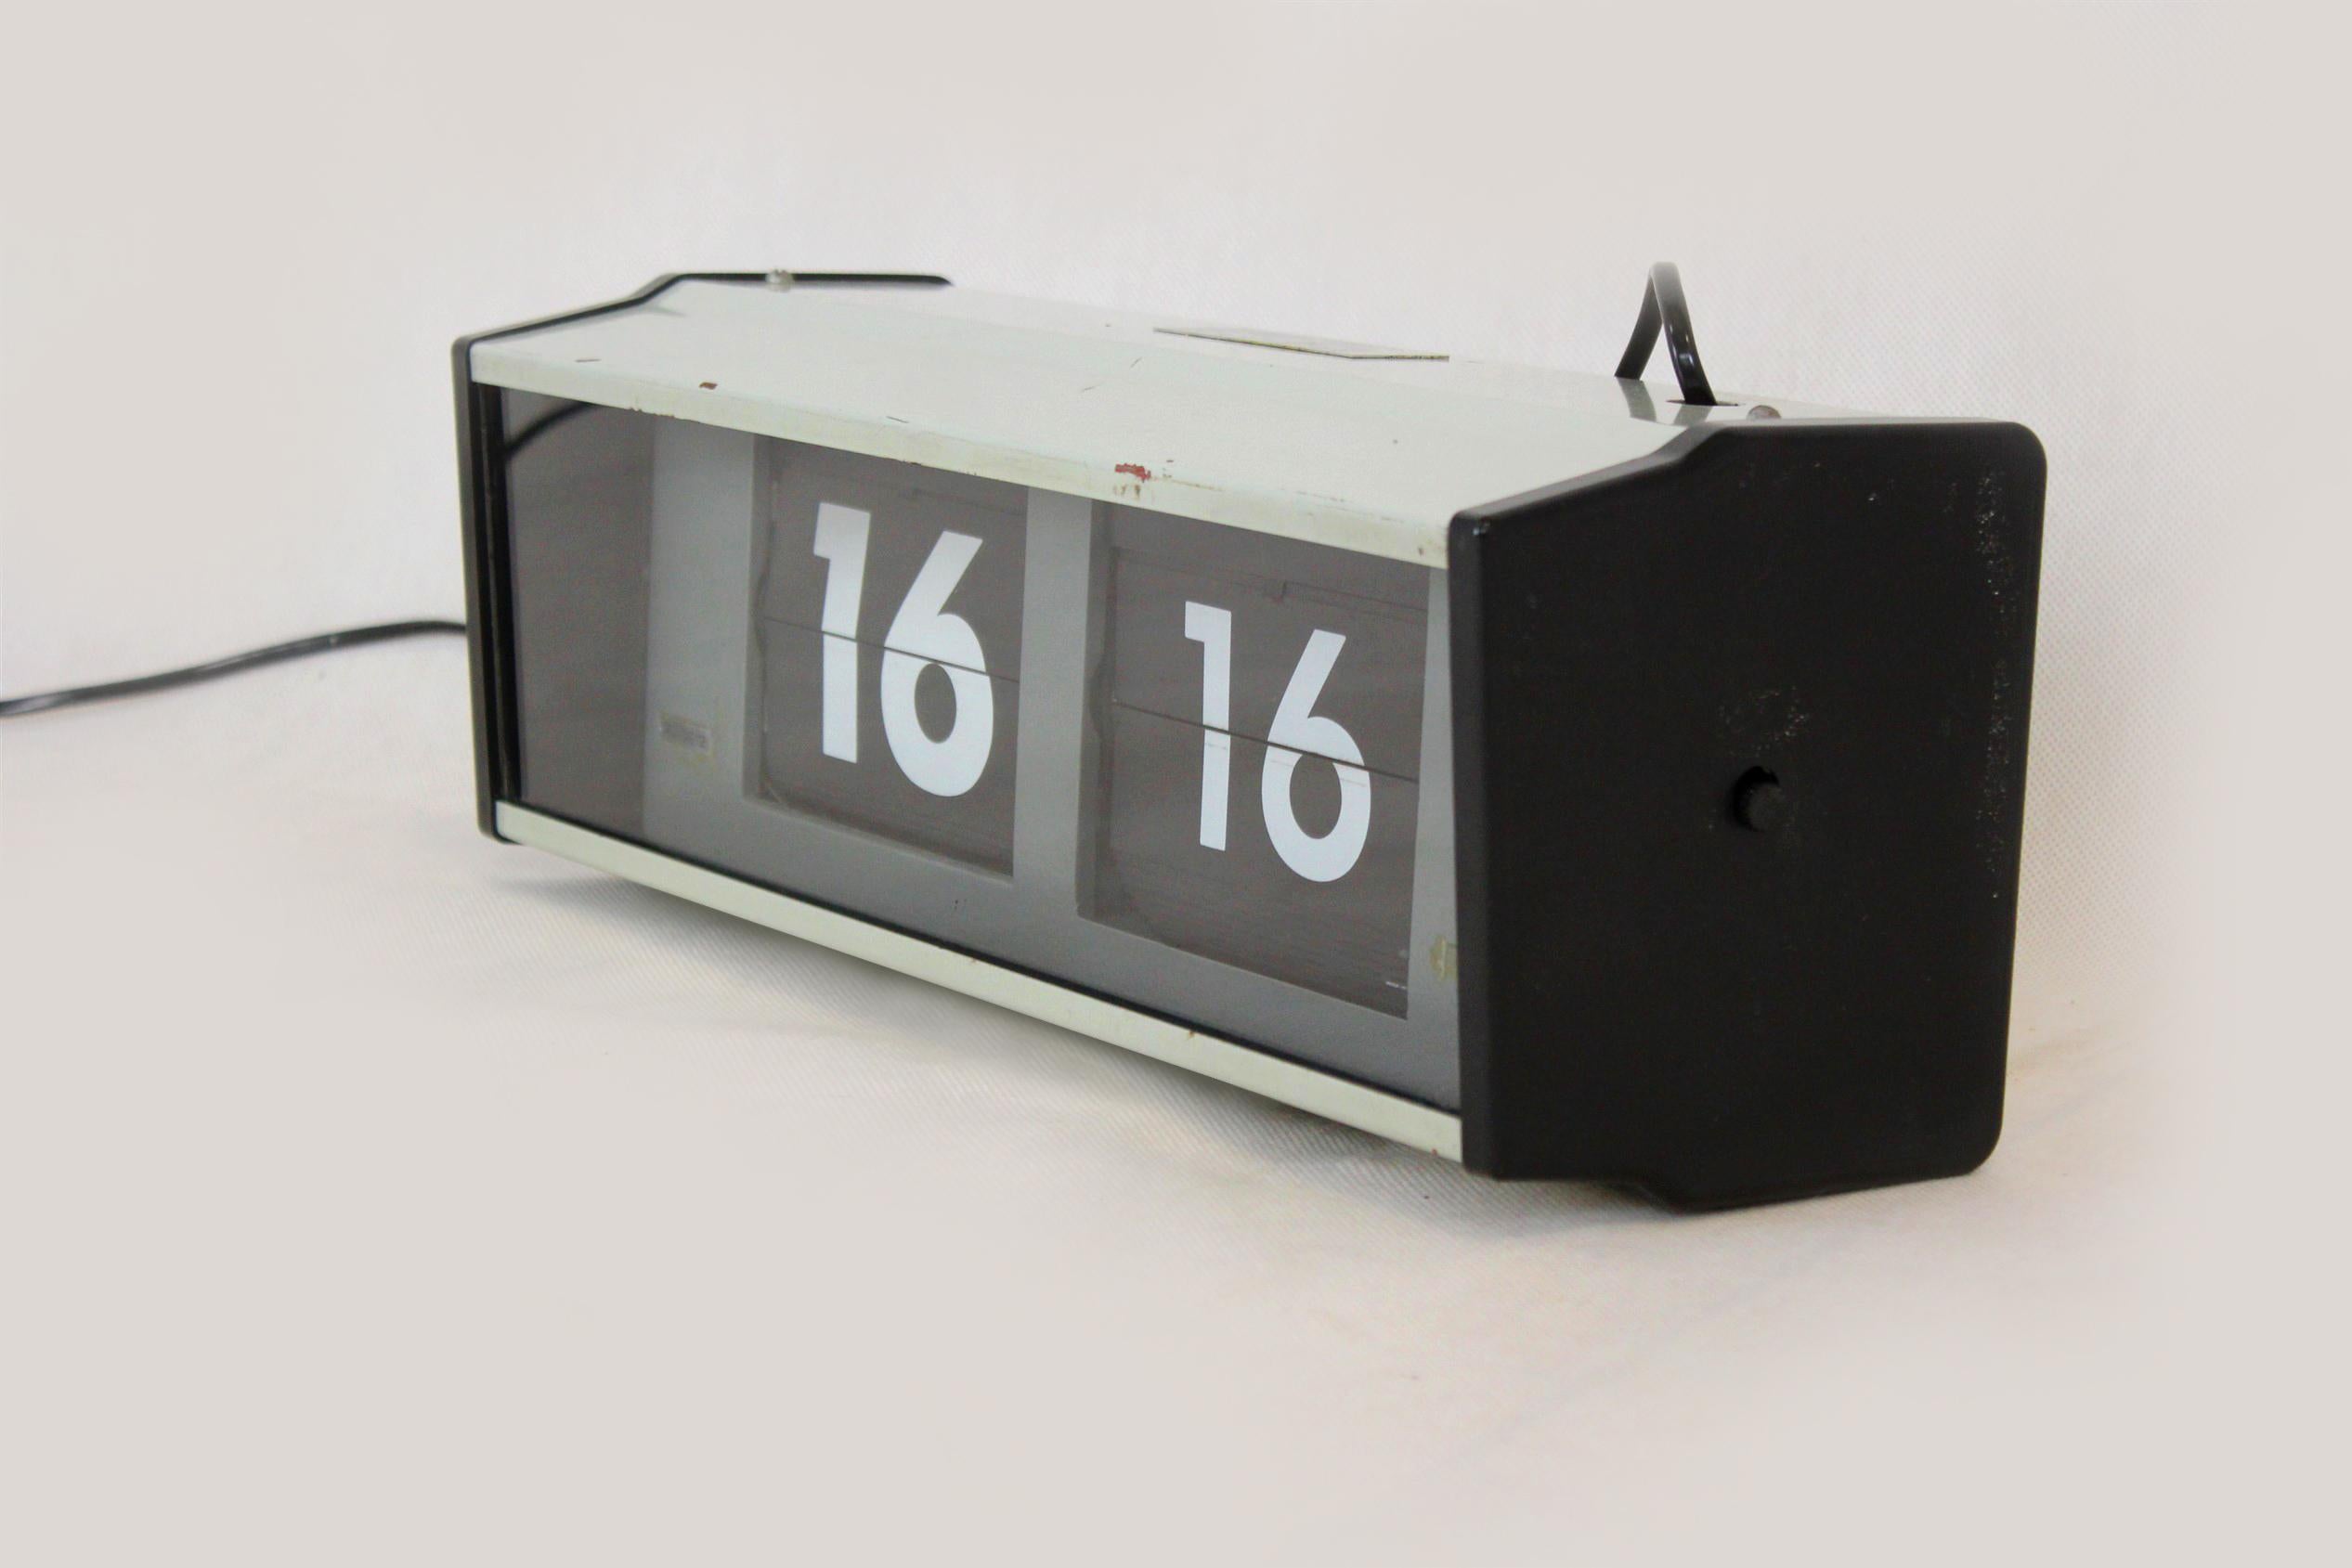 The Pragotron IPJ0612 flip wall clock was designed and manufactured in Czechoslovakia in the 1980s. Clocks of this type were used in railway stations, schools, public administration buildings, etc.
The clock has been converted, an independent